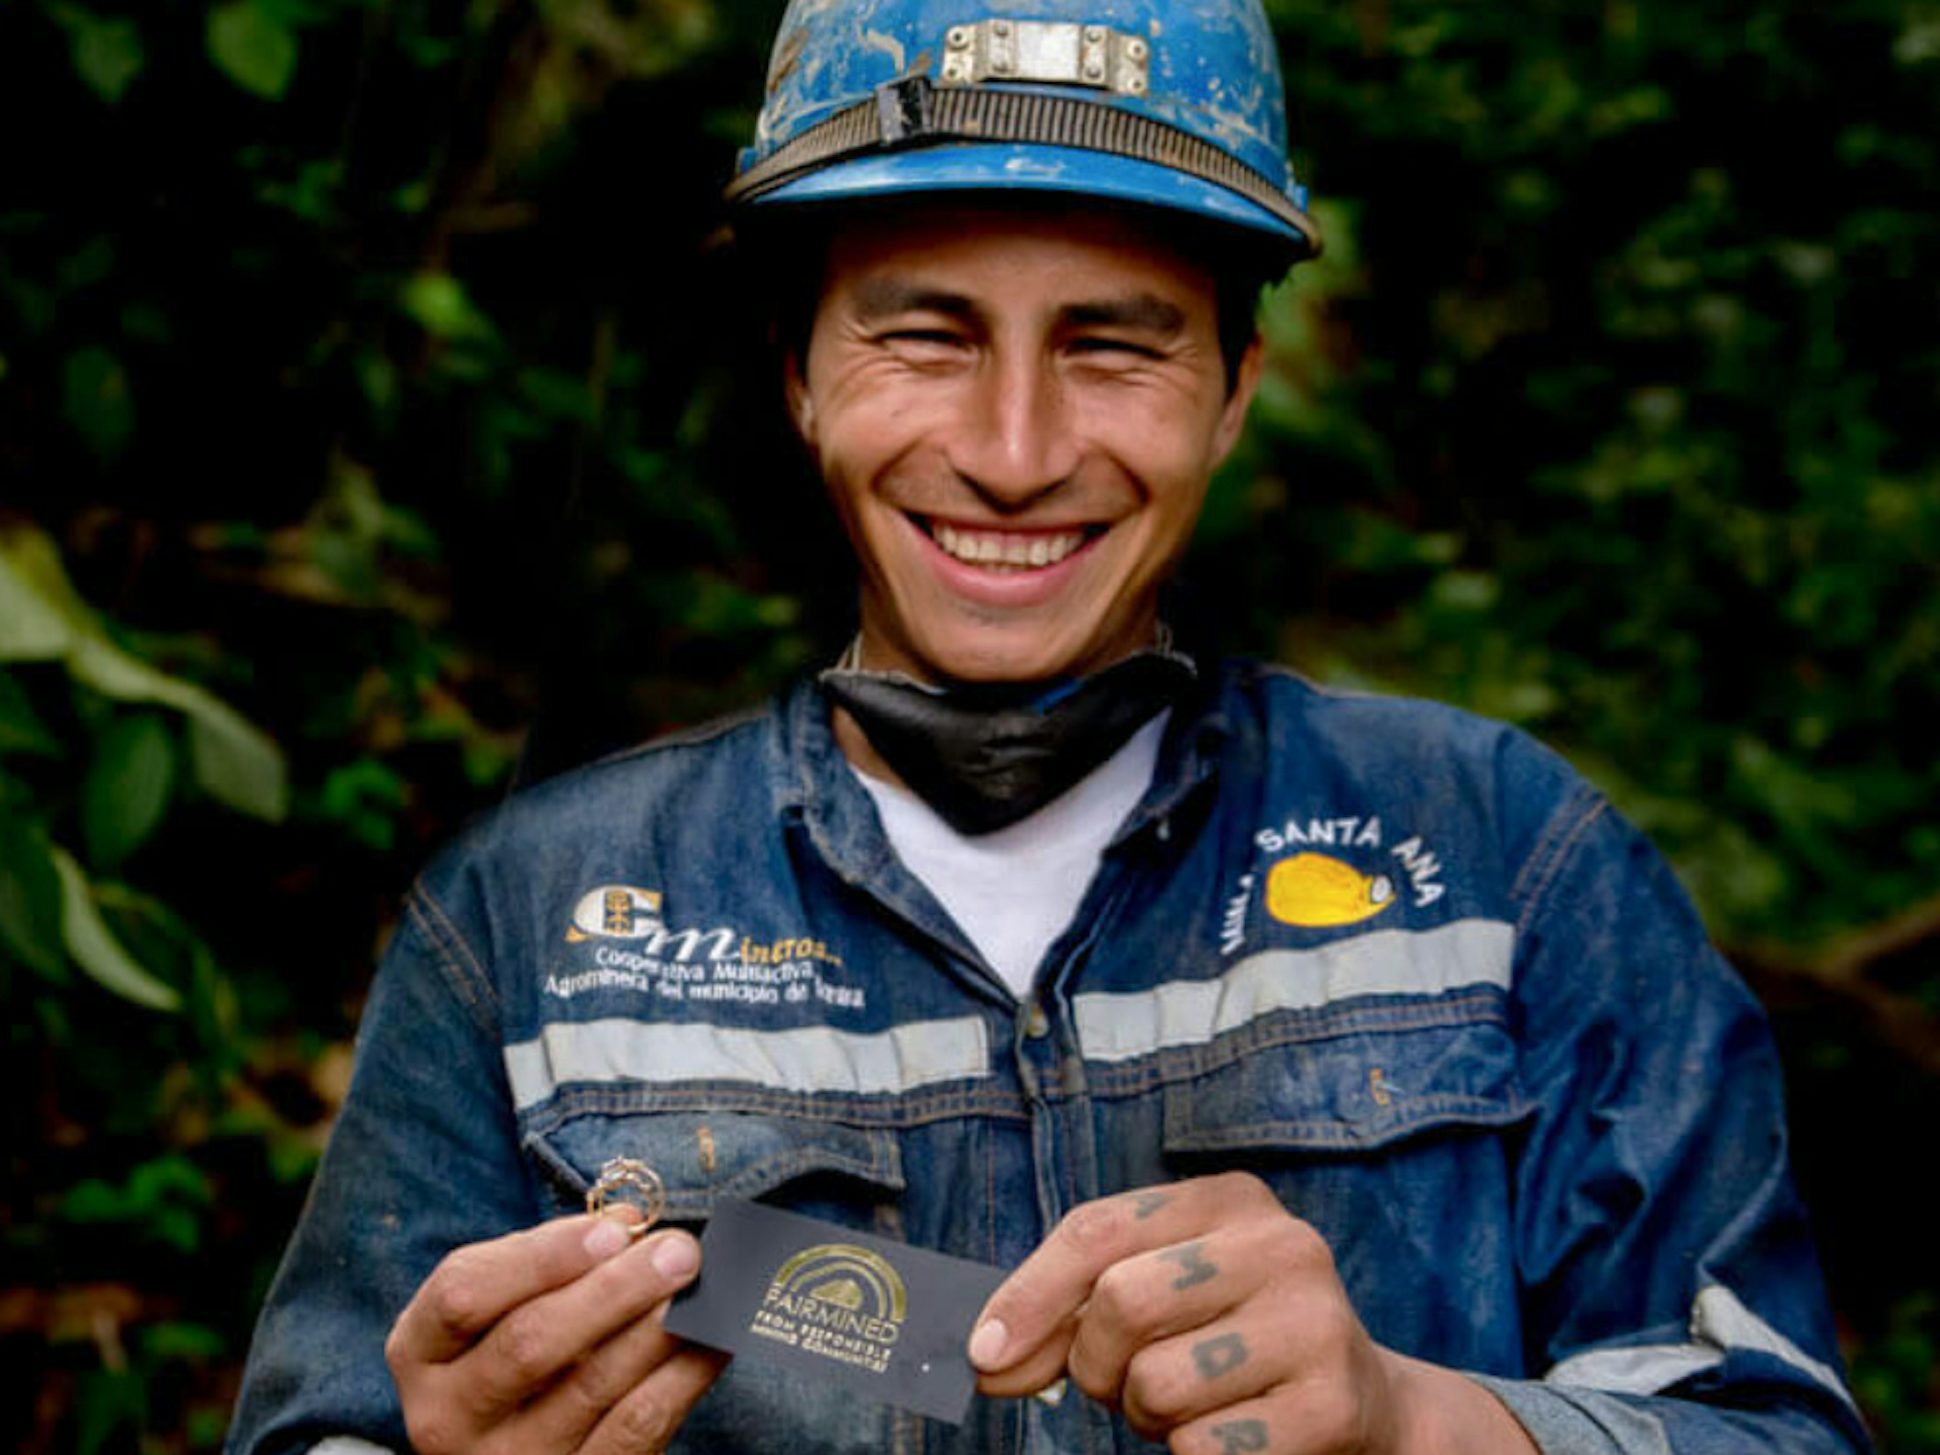 Fairmined miner from the community of Iquira in Colombia - ARM